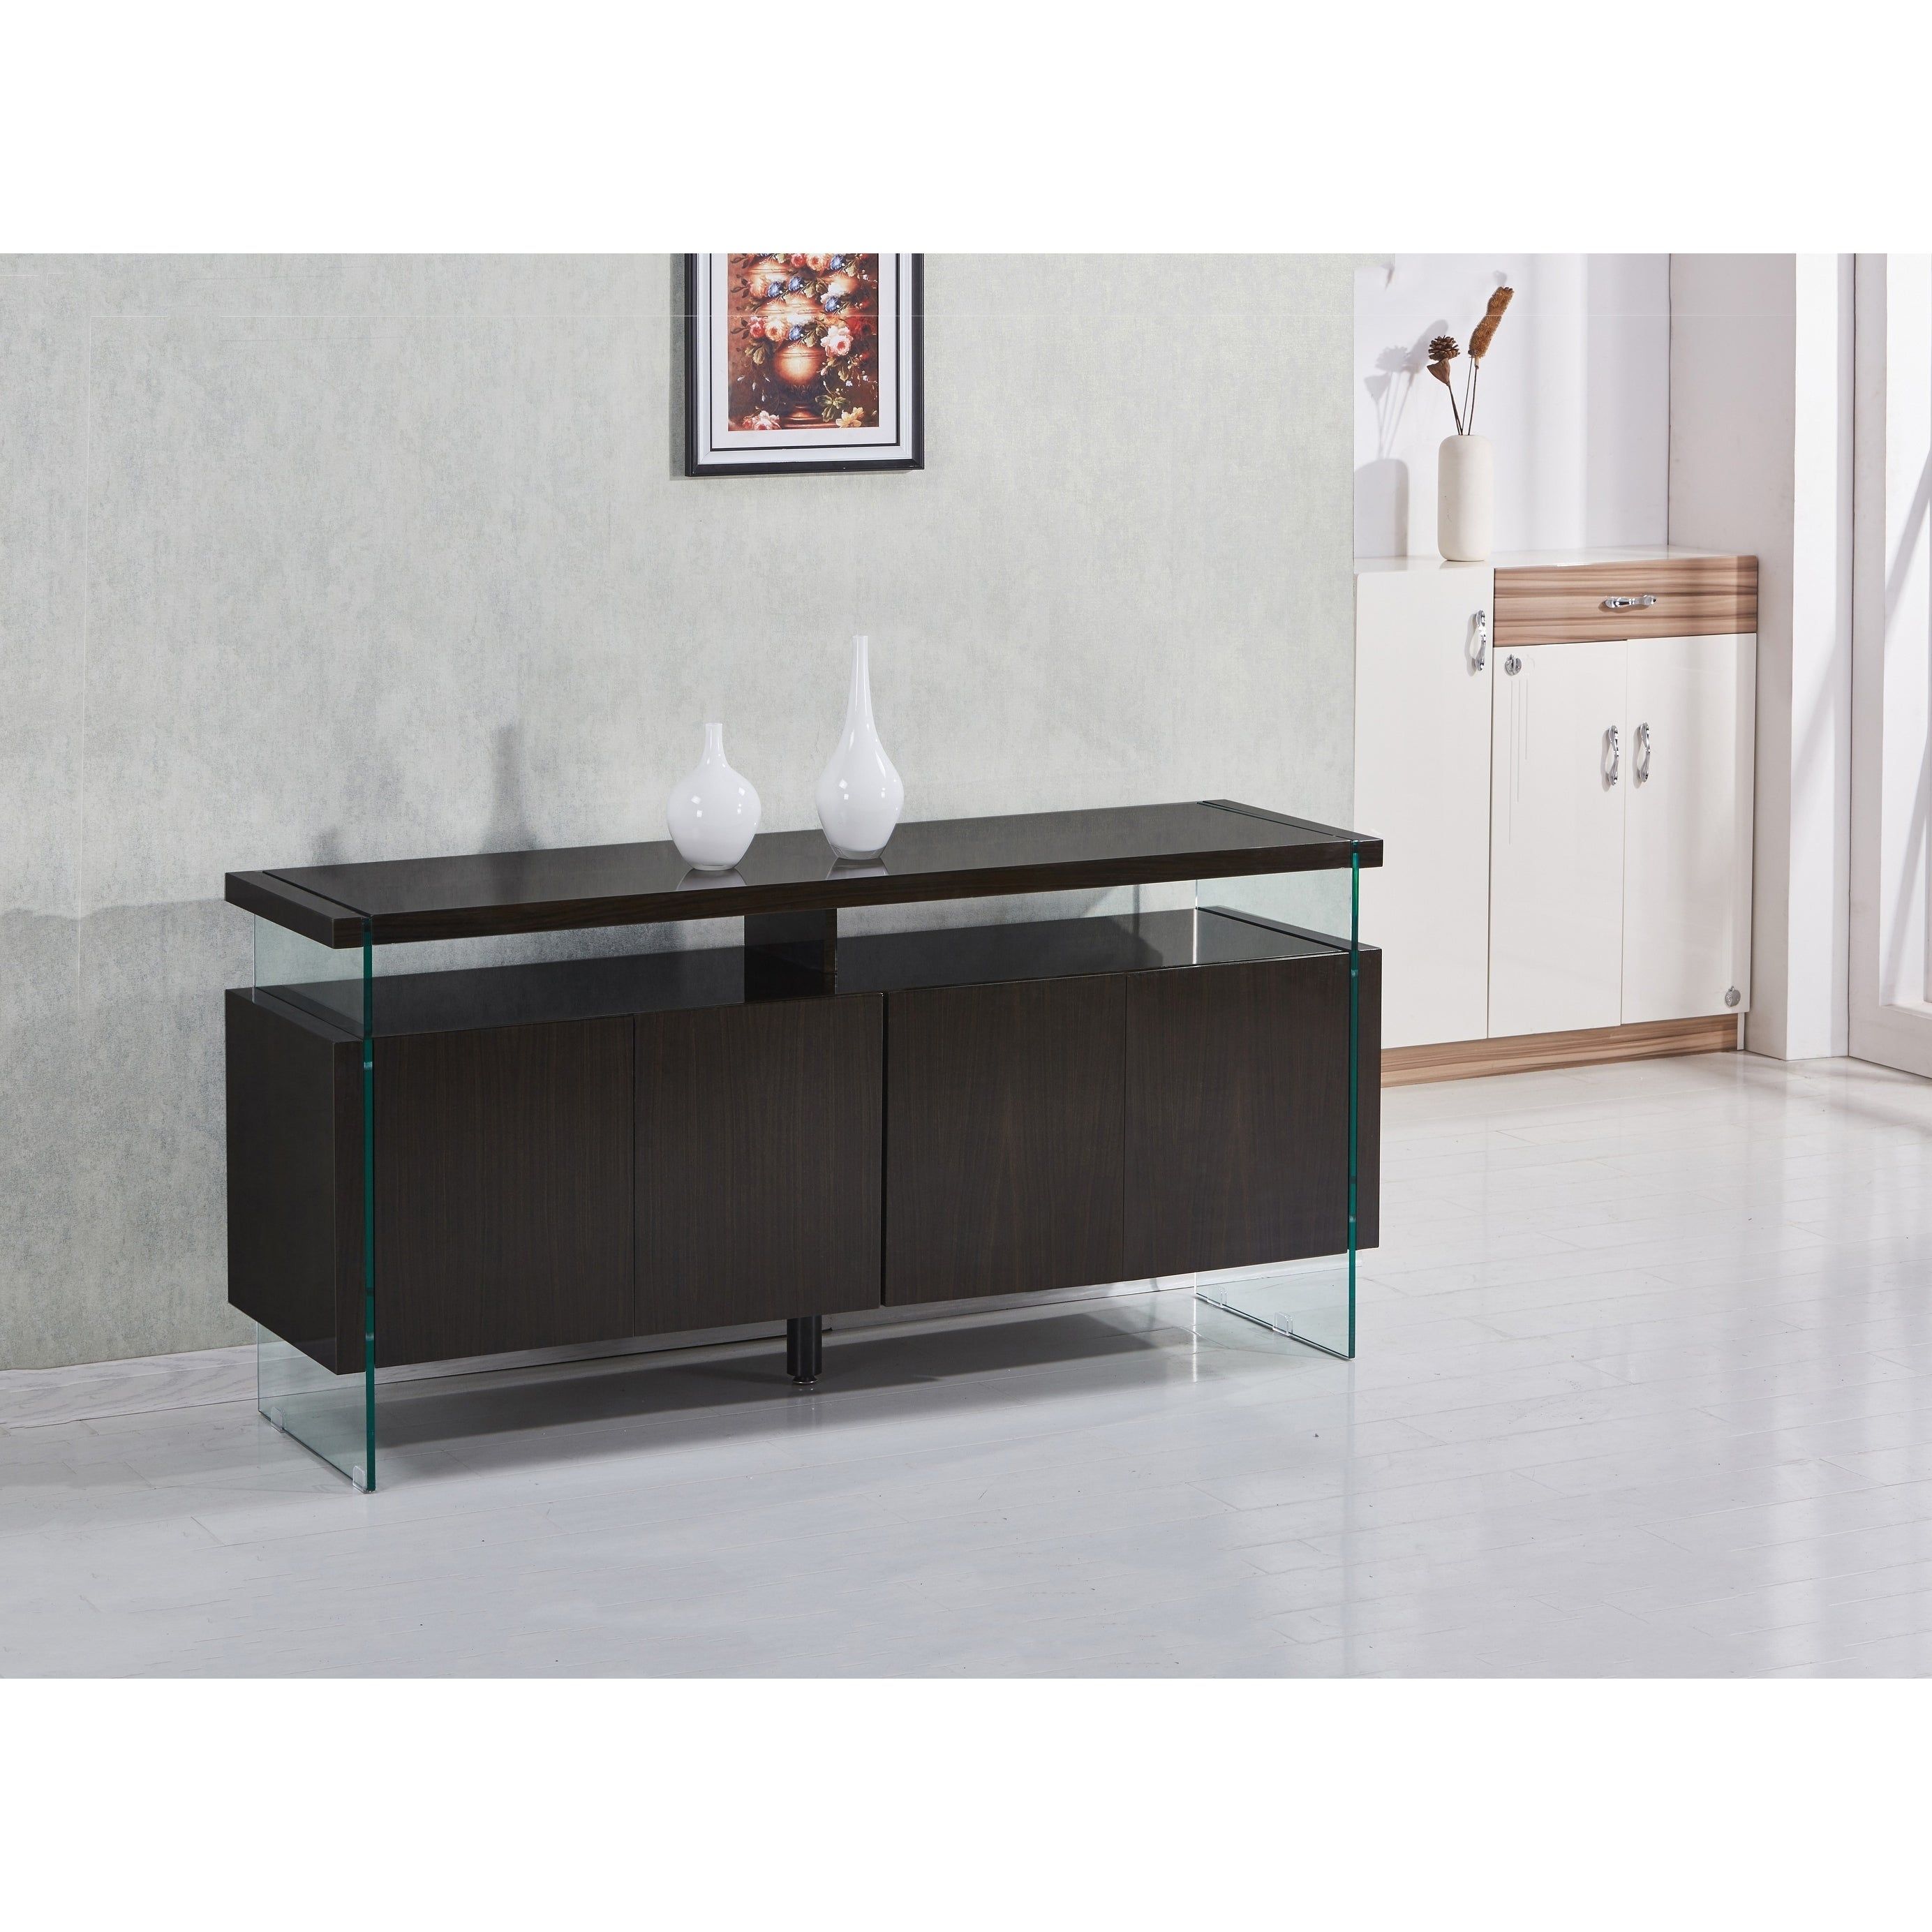 Best Quality Furniture 4 Door Lacquer Buffet Server For 4 Door Lacquer Buffets (View 3 of 30)